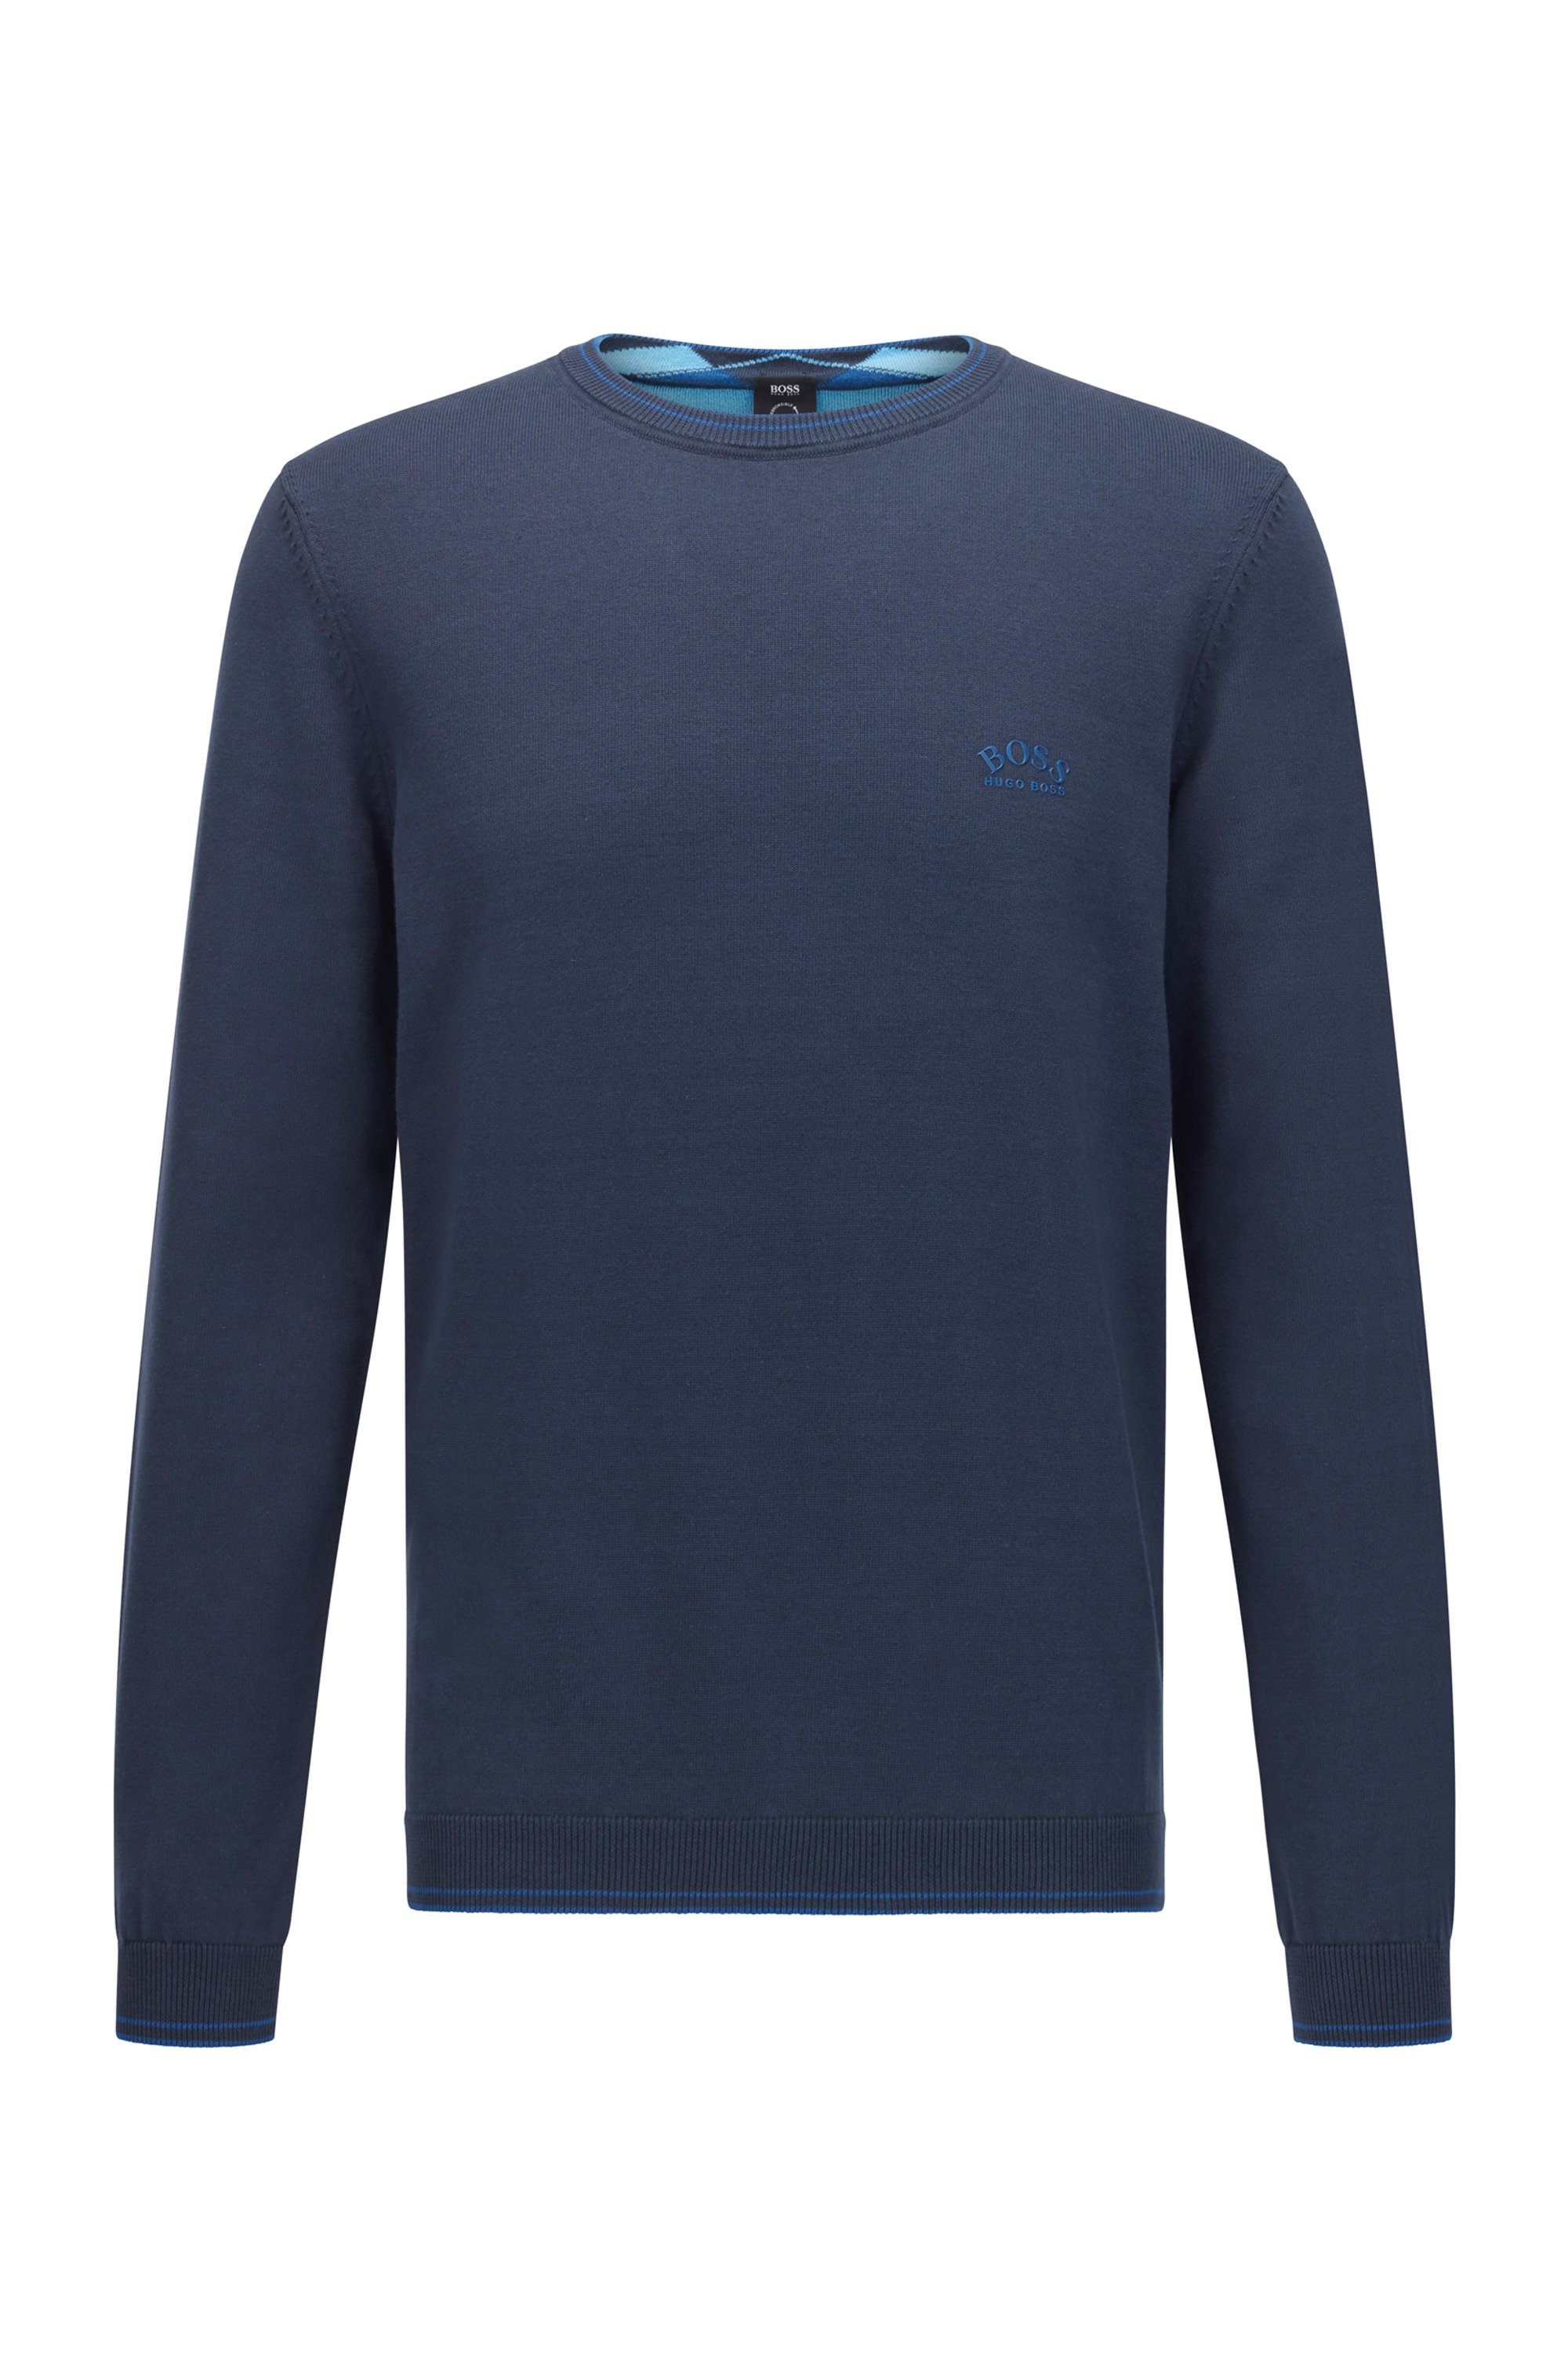 Crew-neck sweater in organic cotton with curved logo, Dark Blue